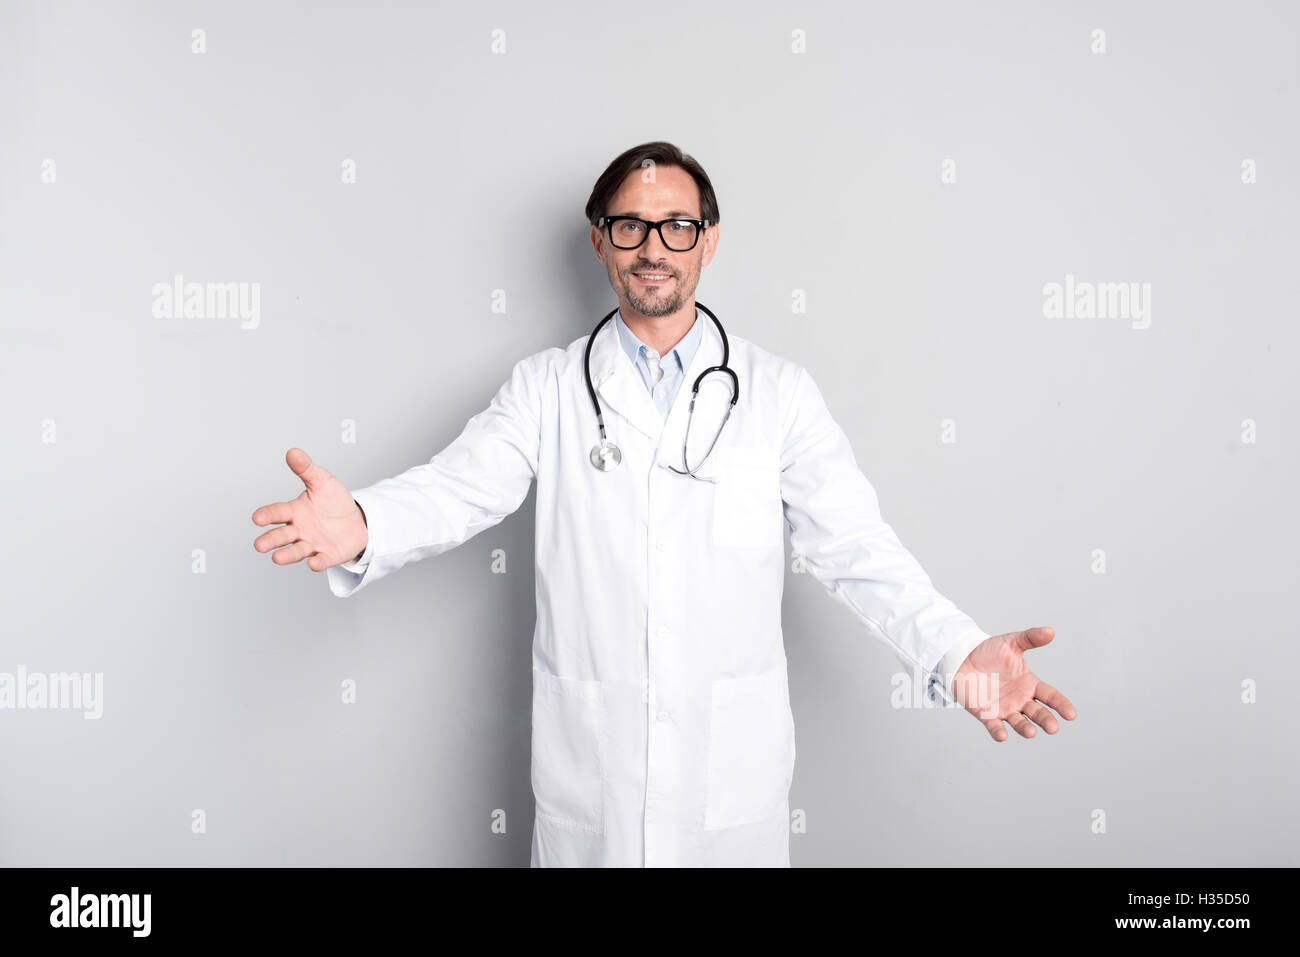 Friendly doctor making an inviting gesture Stock Photo